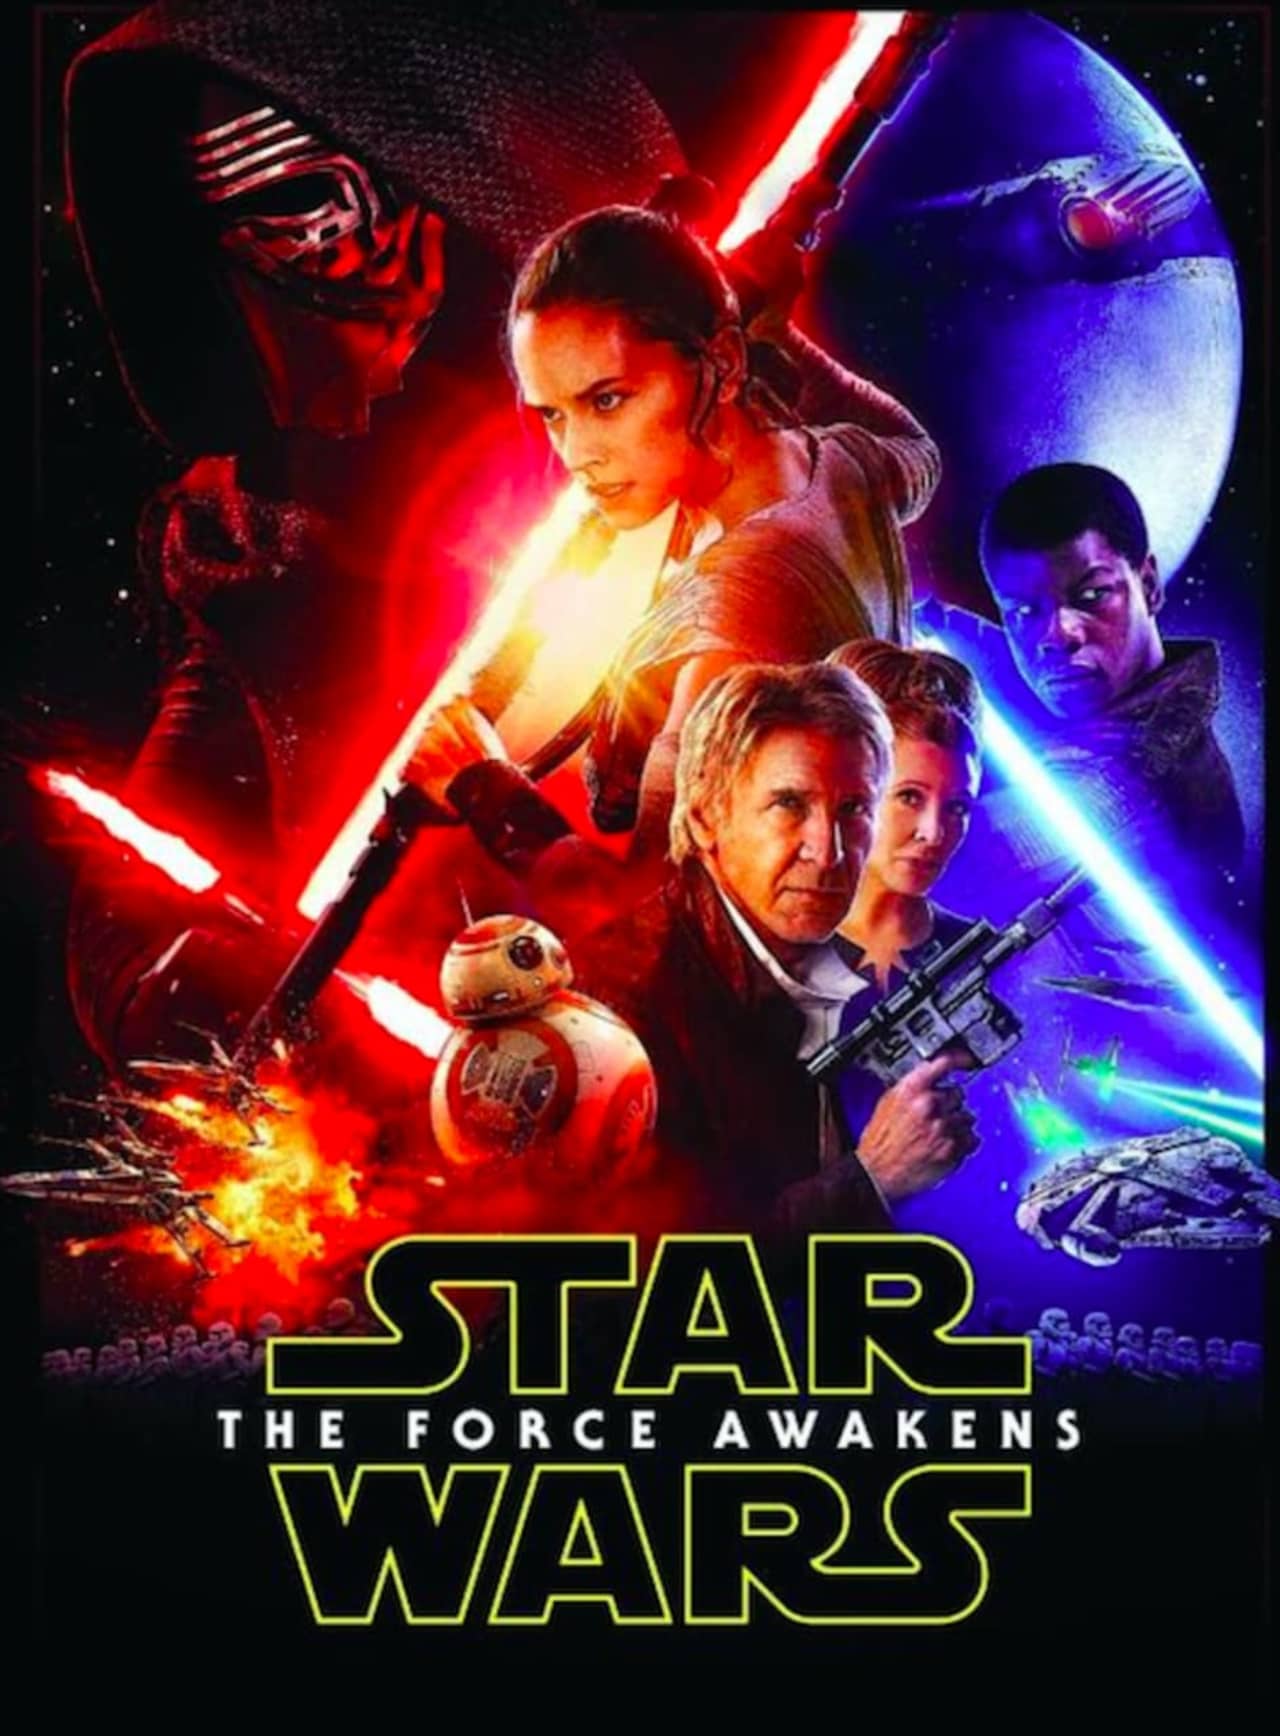 The Edith Wheeler Memorial Library will show "Star Wars: The Force Awakens" April 5.